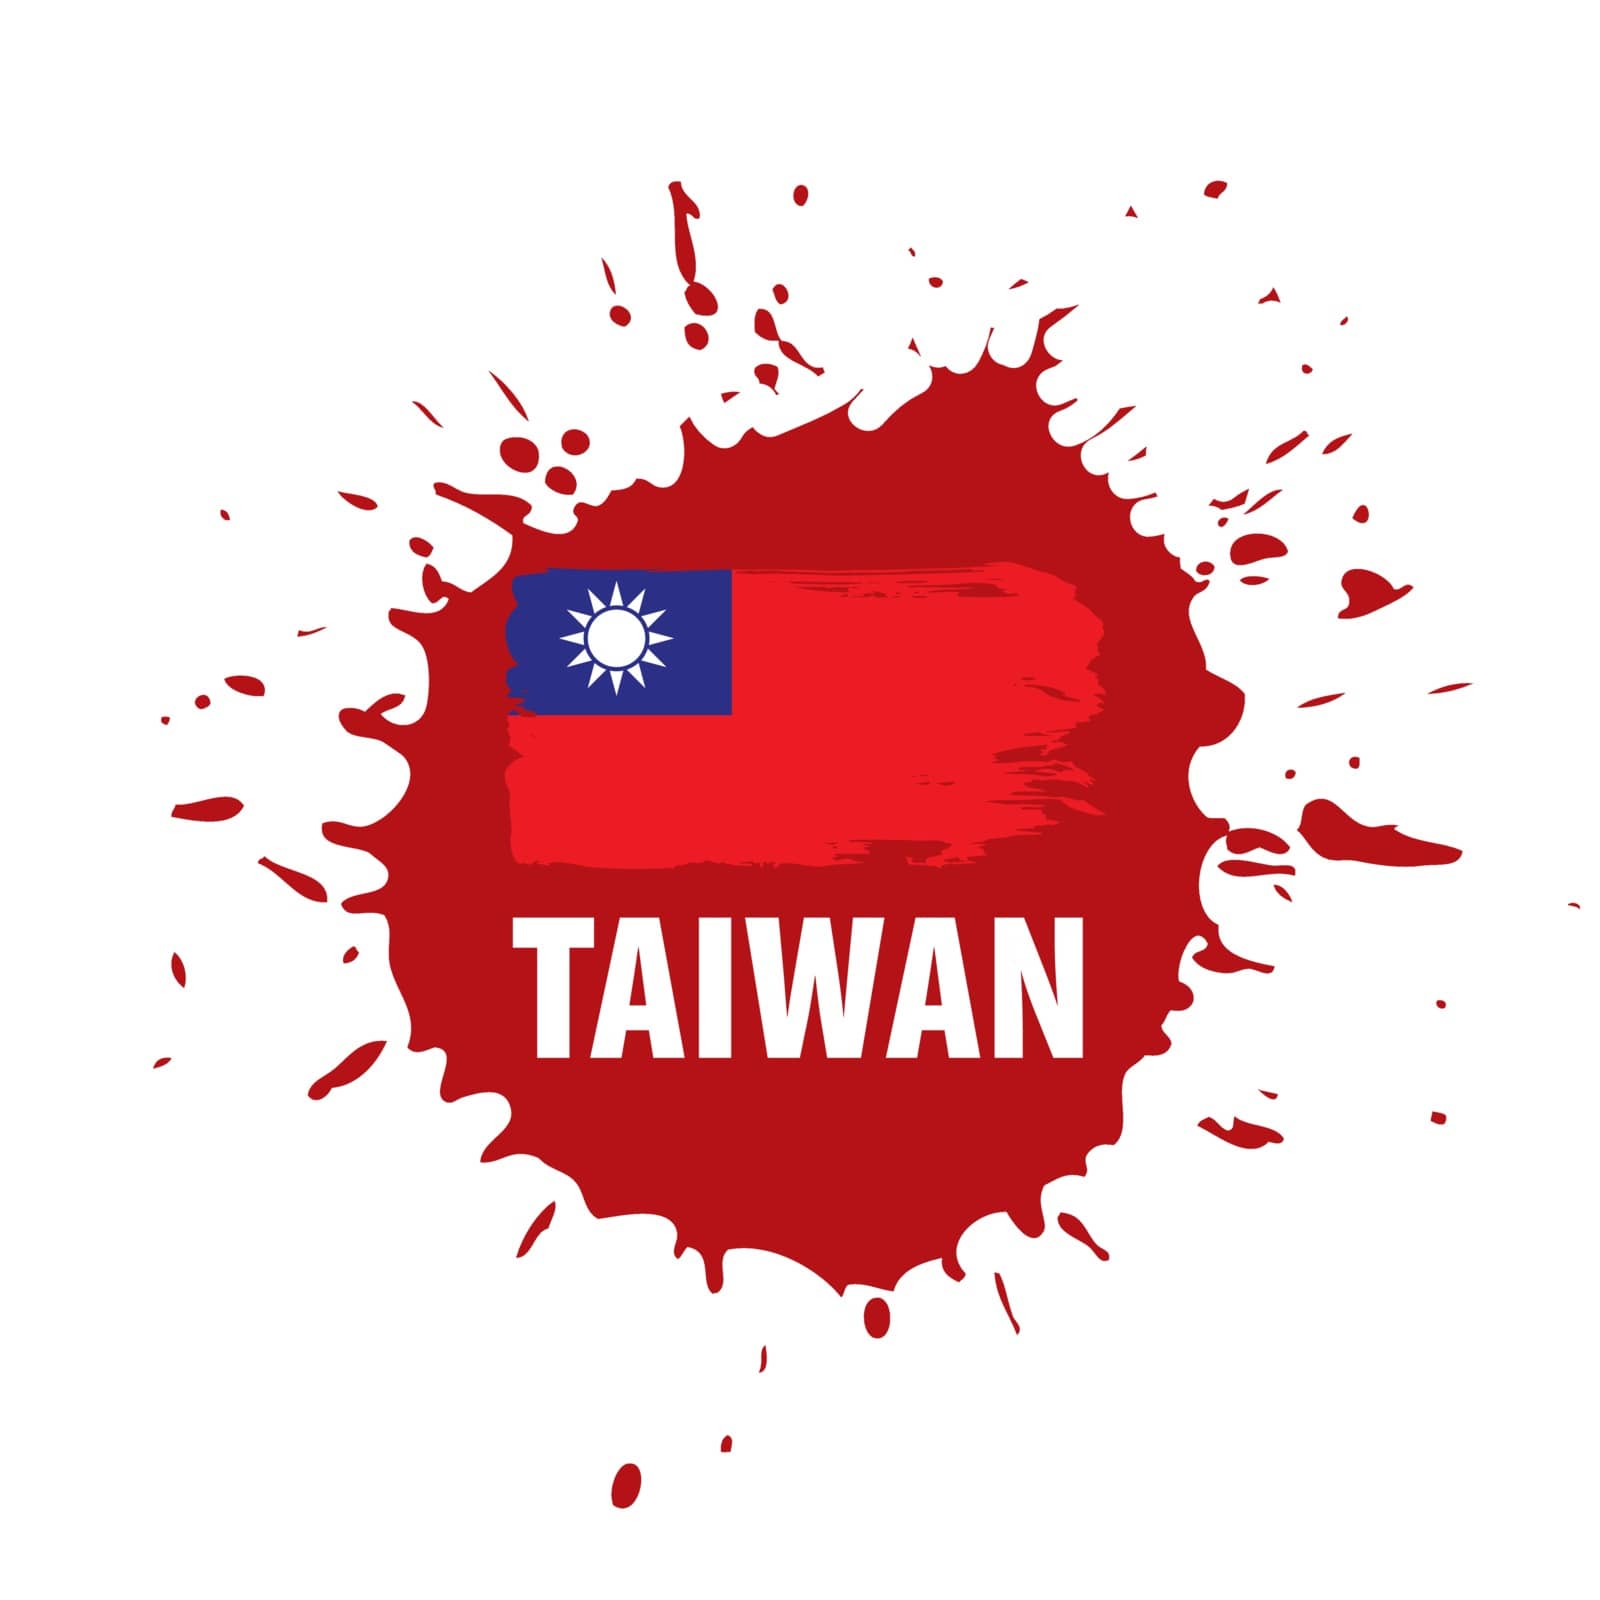 Taiwan flag, vector illustration on a white background.